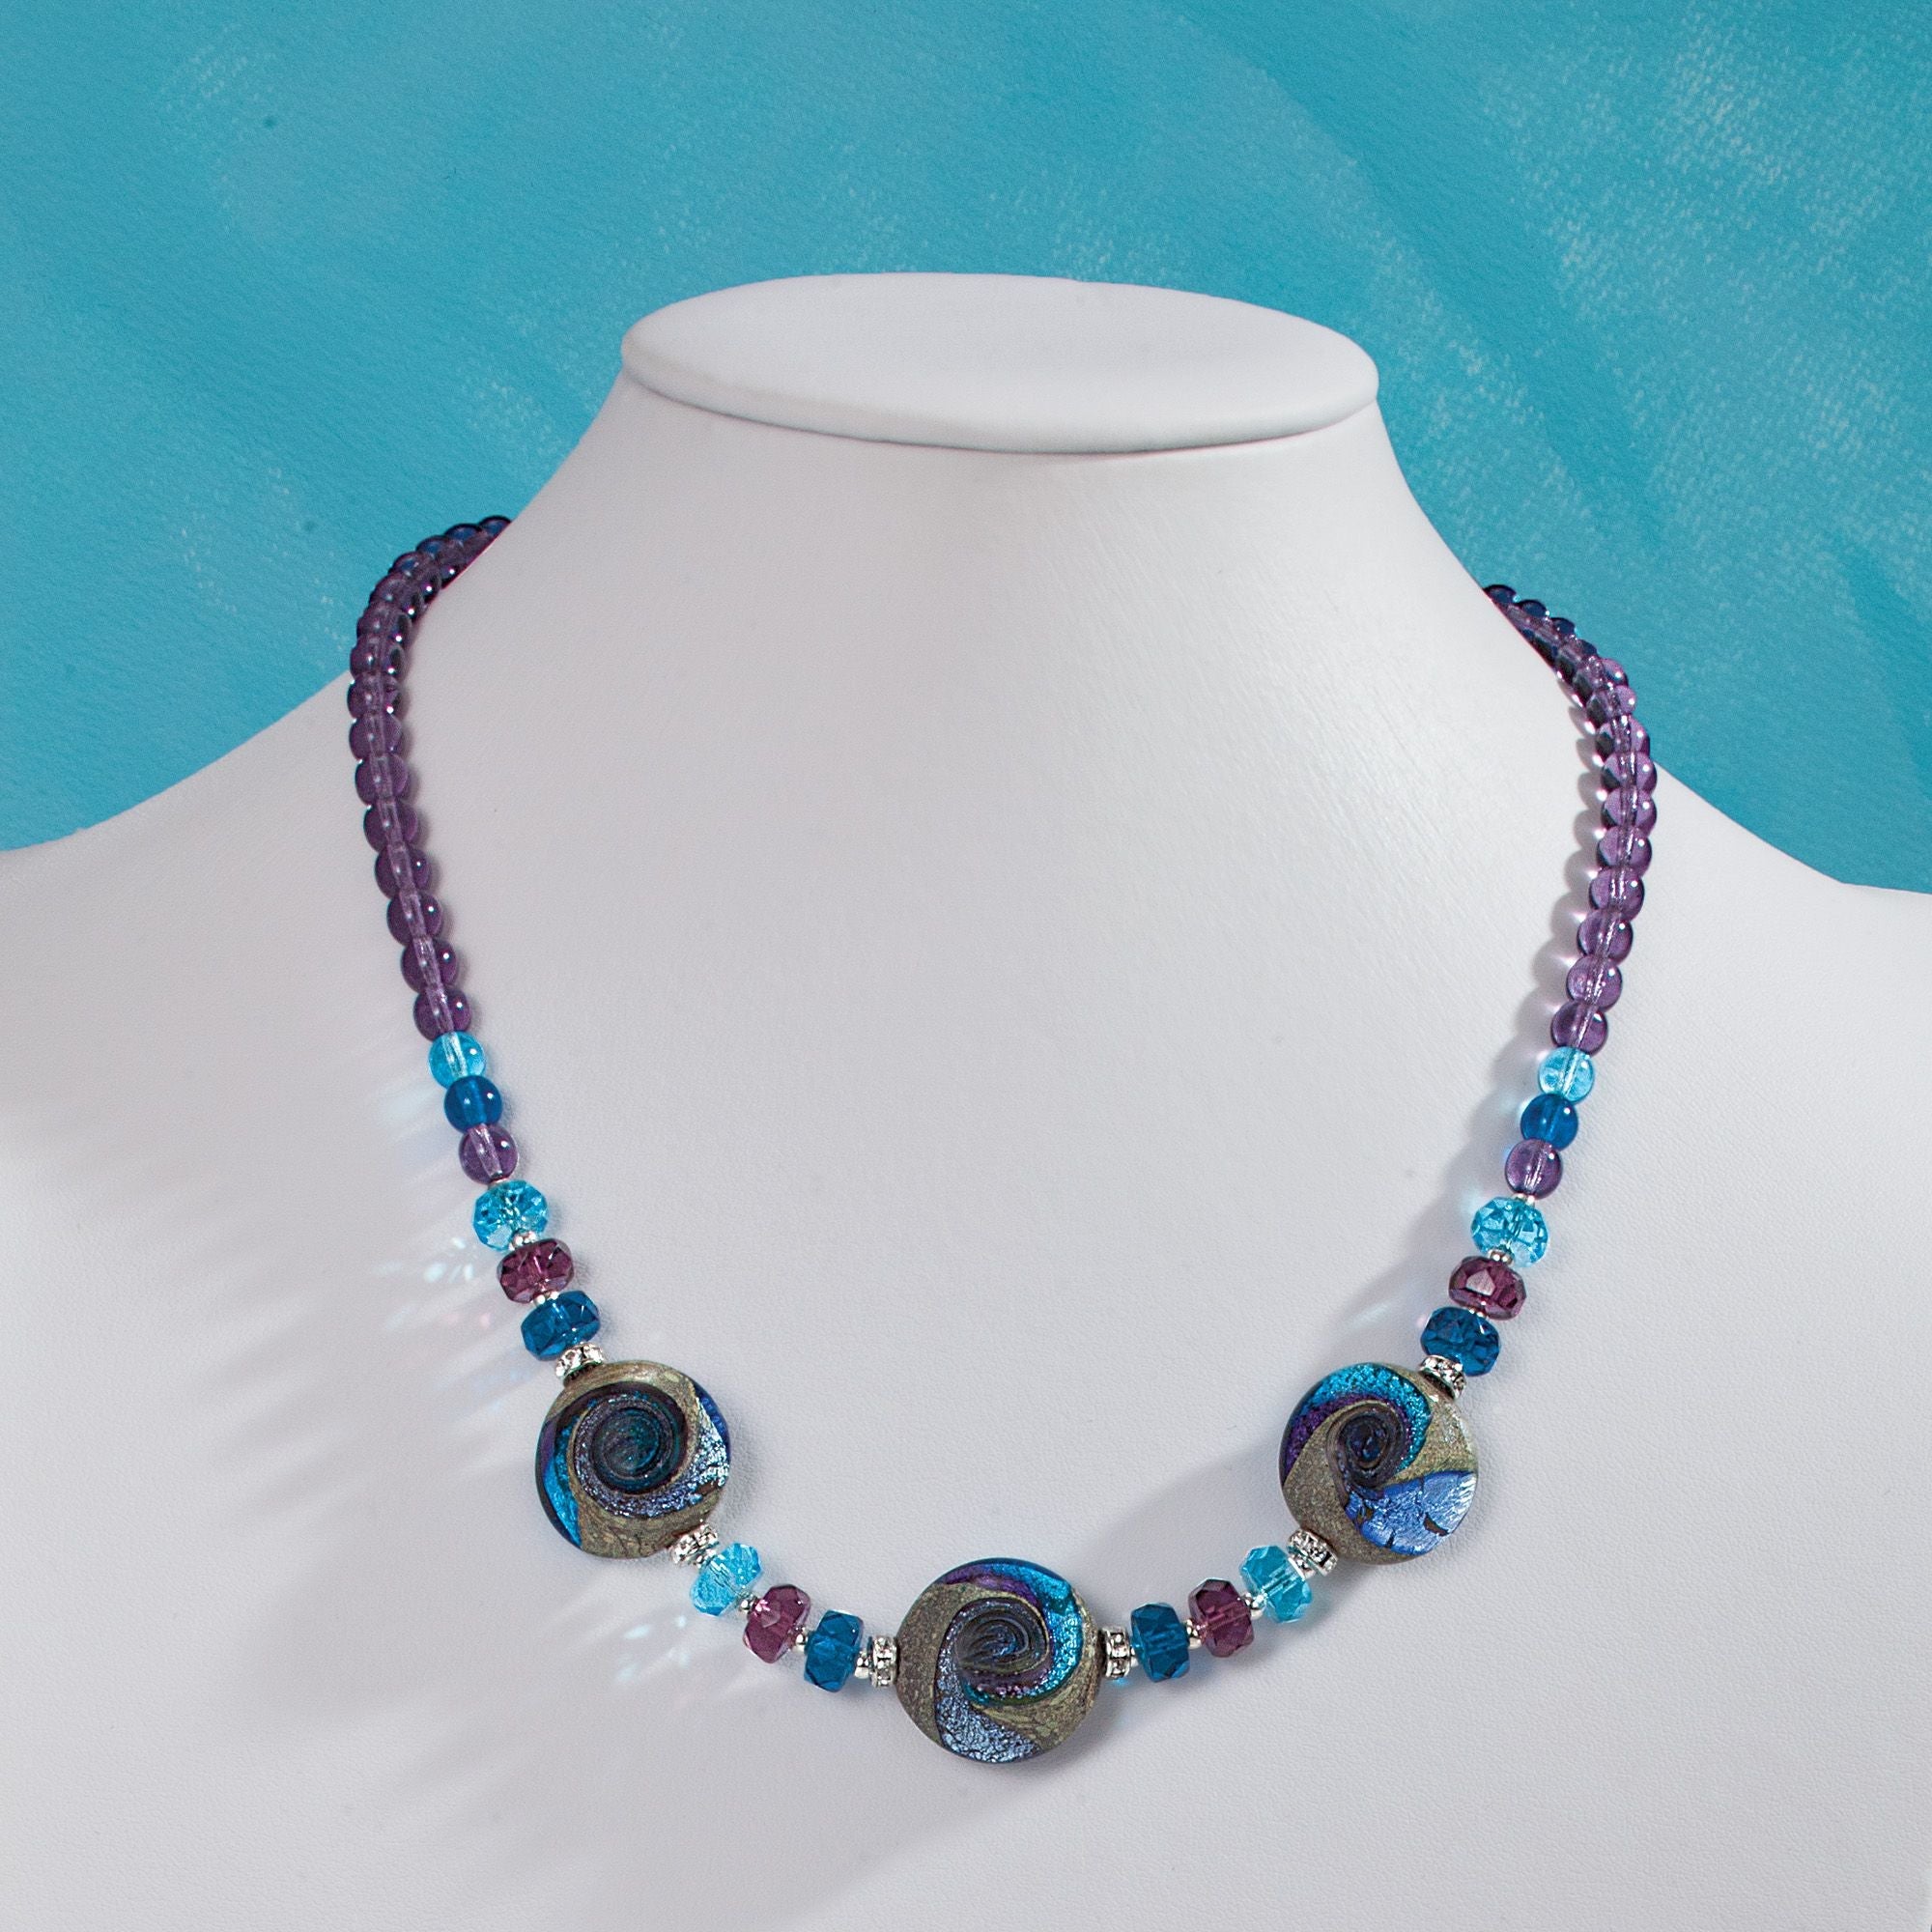 Keep Dreaming Murano Glass Necklace